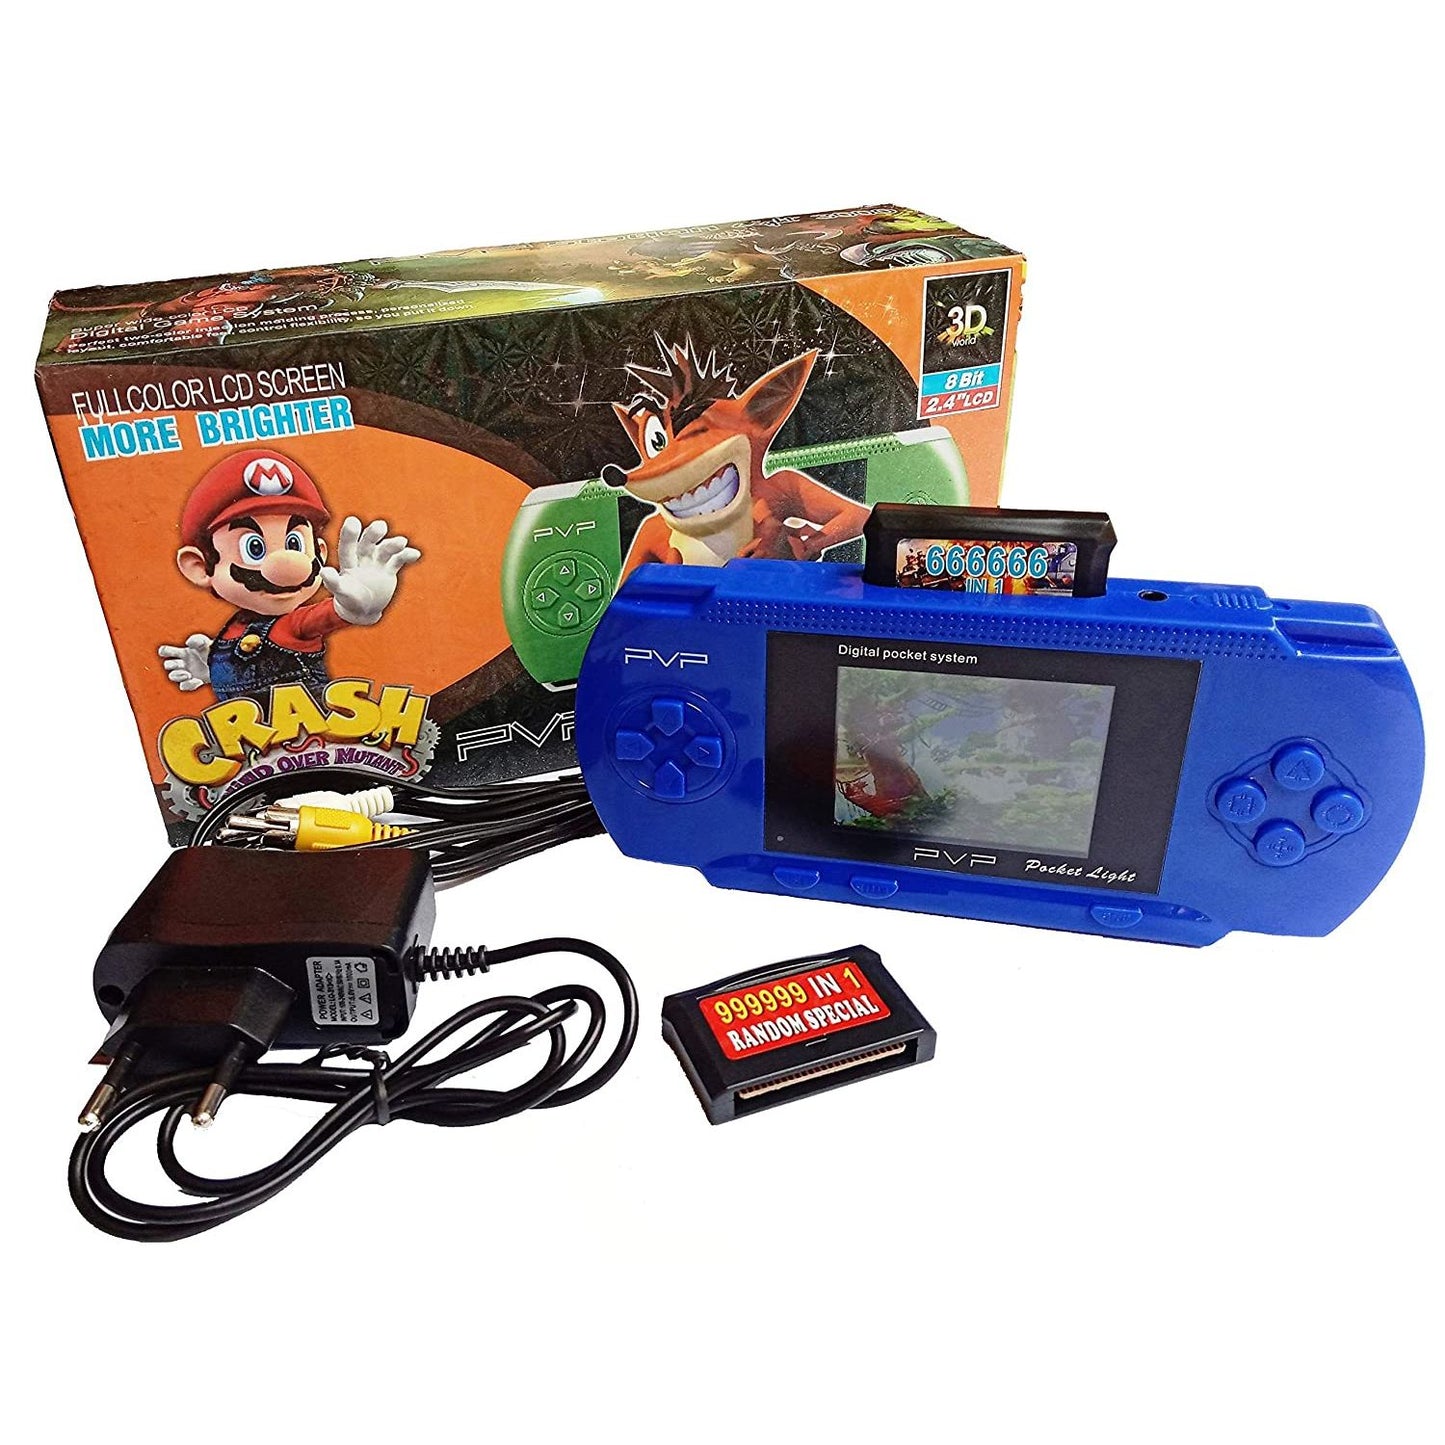 MM TOYS Electronic Video Game - Pre-Installed with 600 Classic Games Like Mario, Contra, Ice Lander, Bomber Man, Rechargeable Battery, Colored Screen, TV/LED Connectivity - Color May Vary